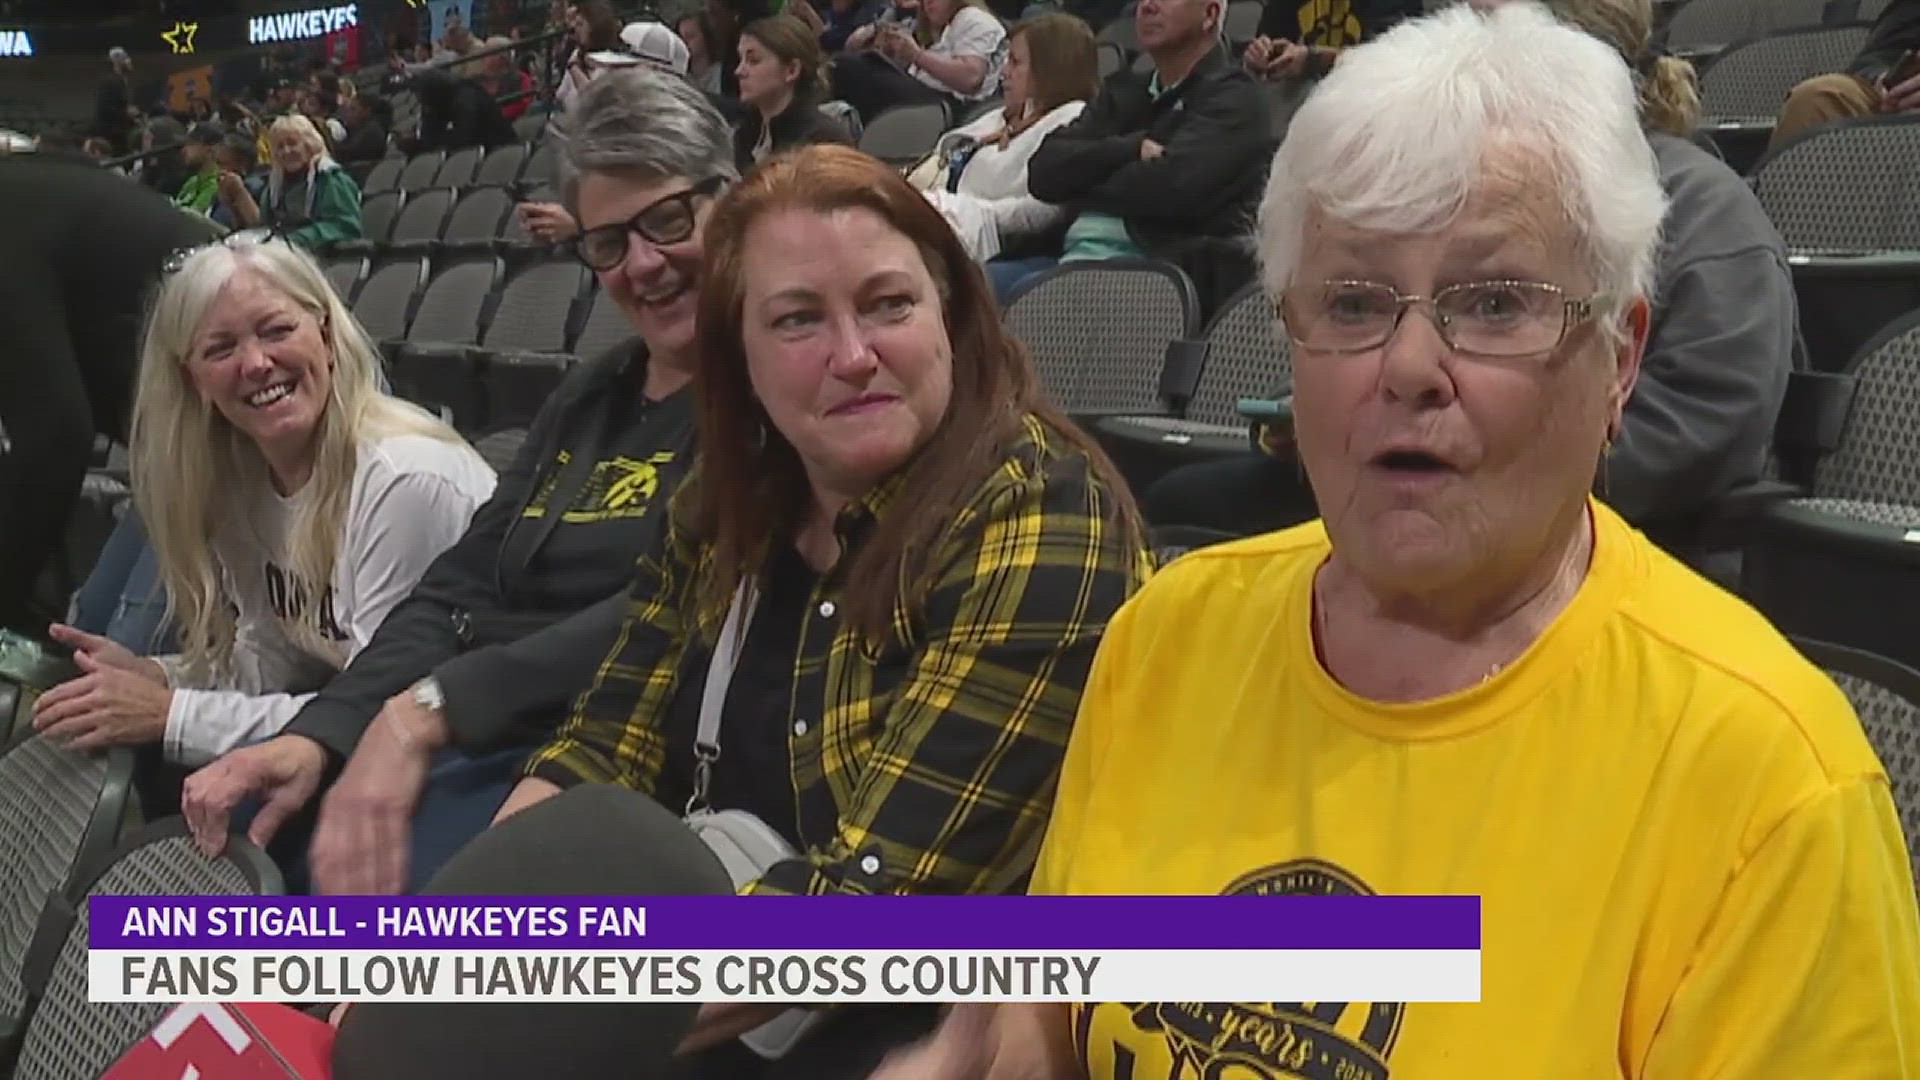 Being a Hawkeye means more to some than others. These Iowa Hawkeyes fans have traveled from Iowa City to Seattle and now to Dallas.